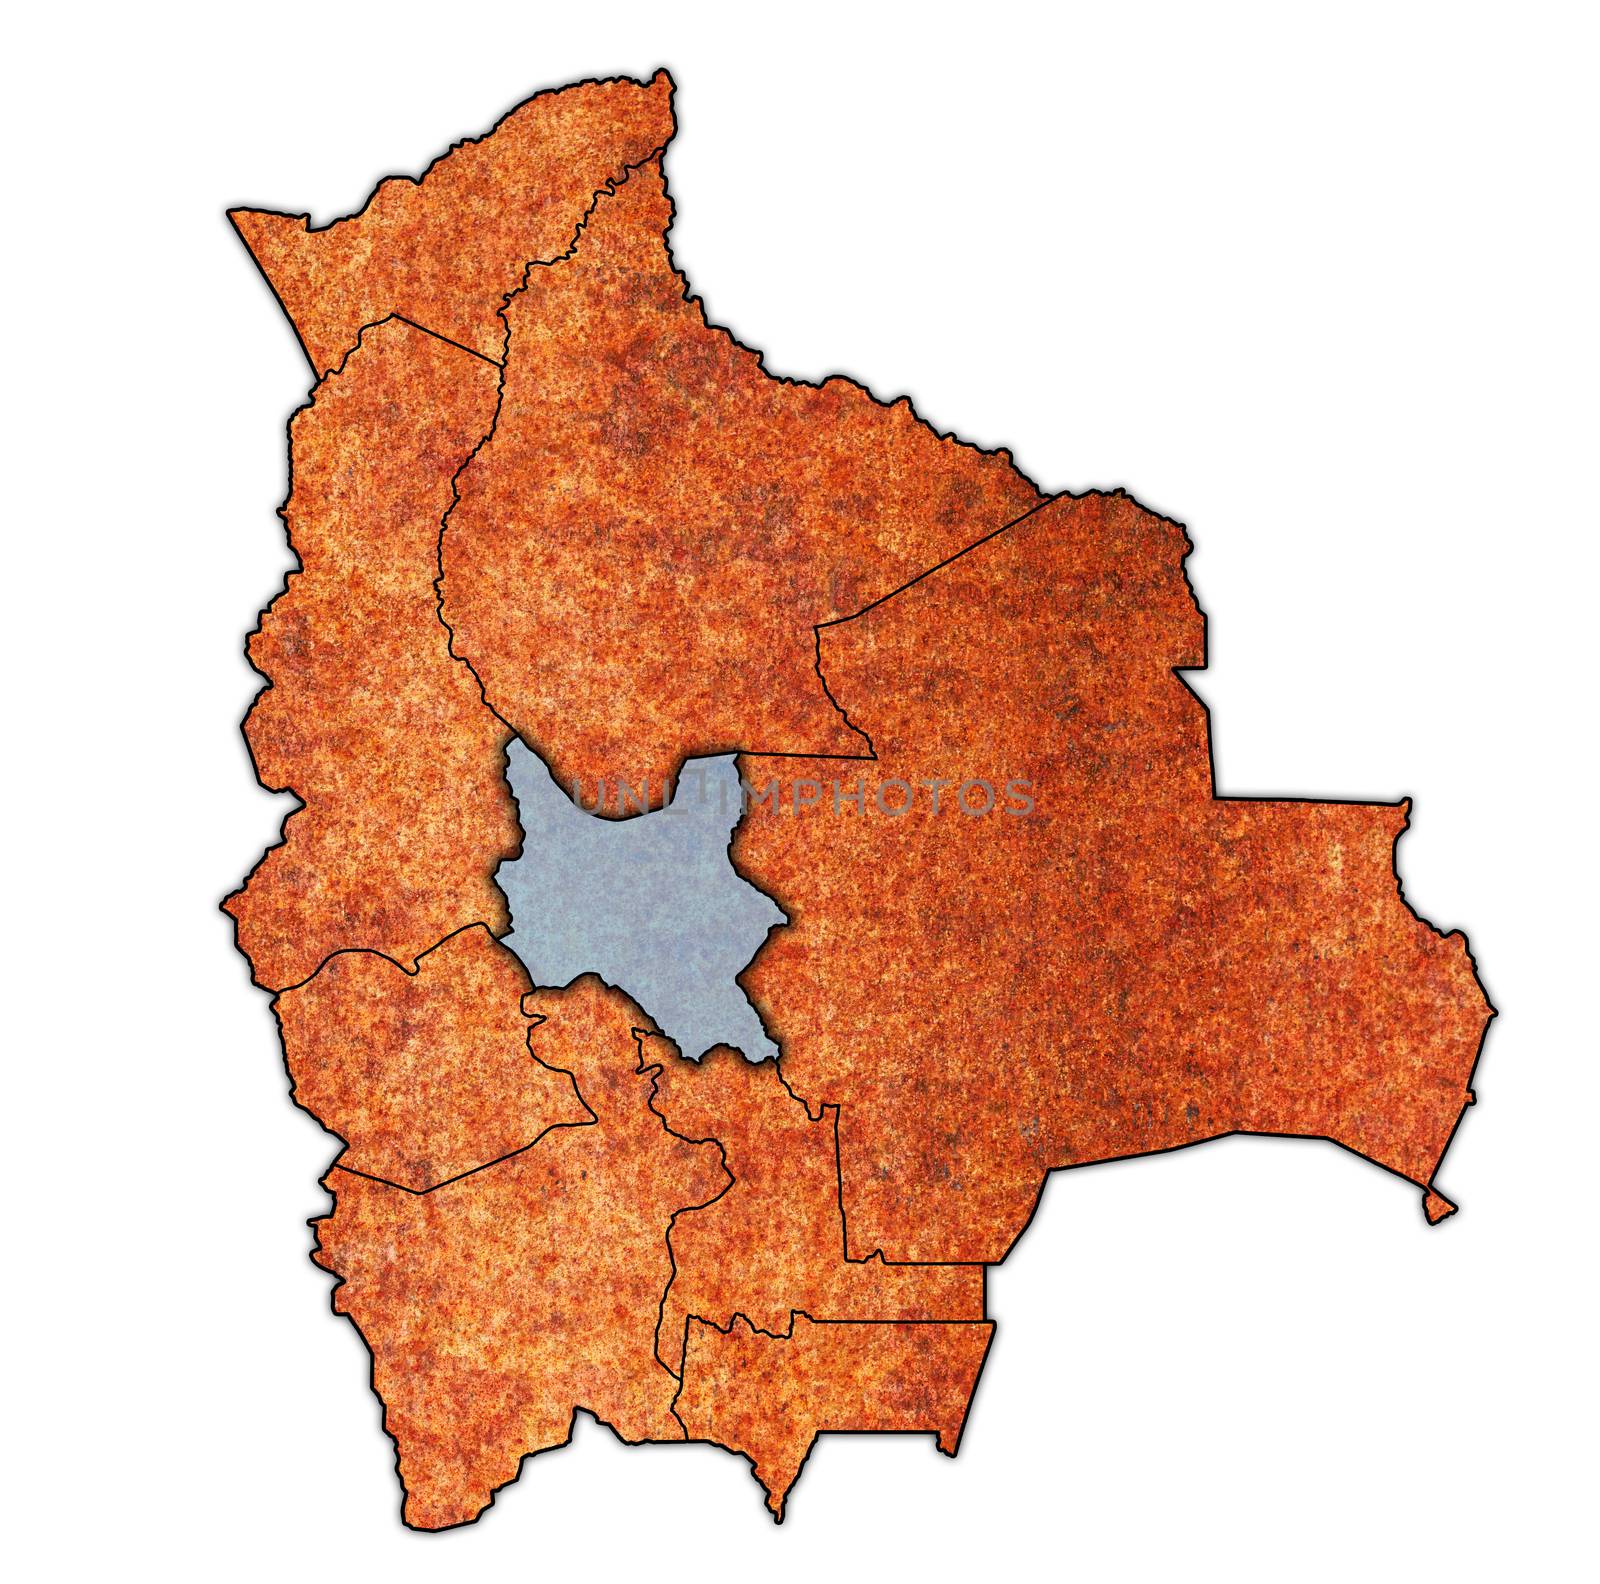 territory of cochabamba region on administration map of Bolivia by michal812